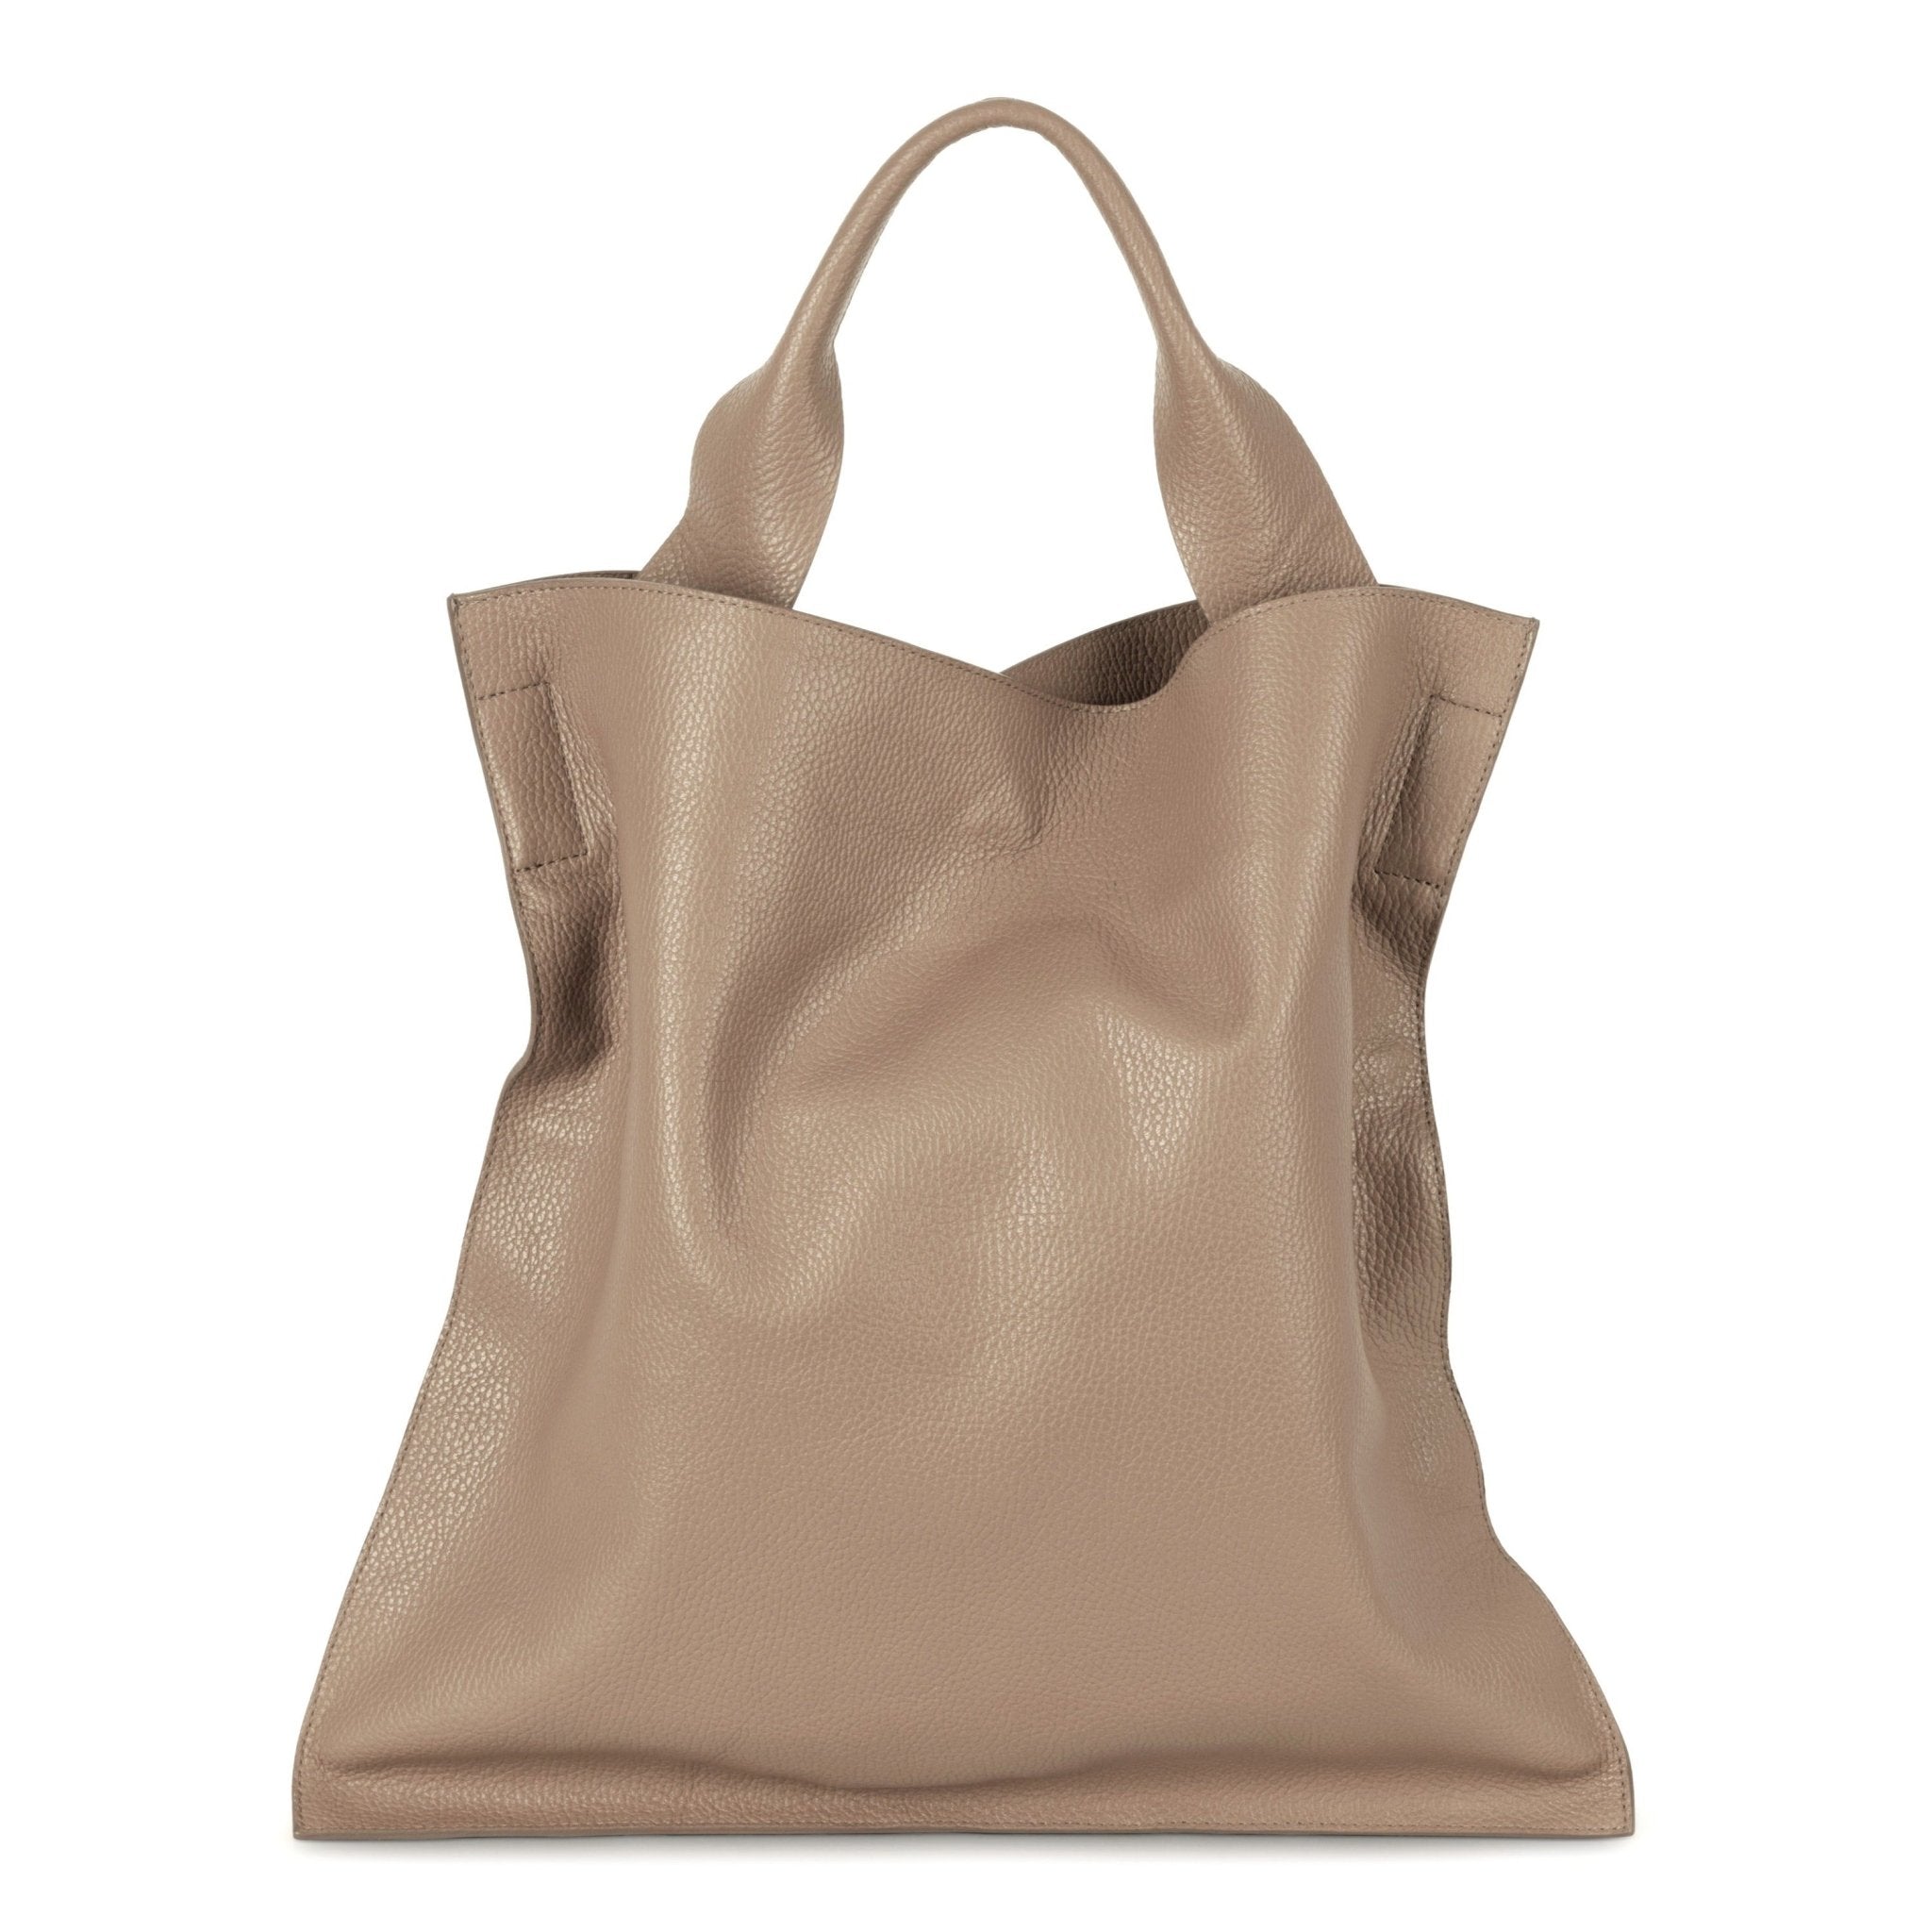 Infinito Therese Bag Taupe - Den Lille Ida - Infinito